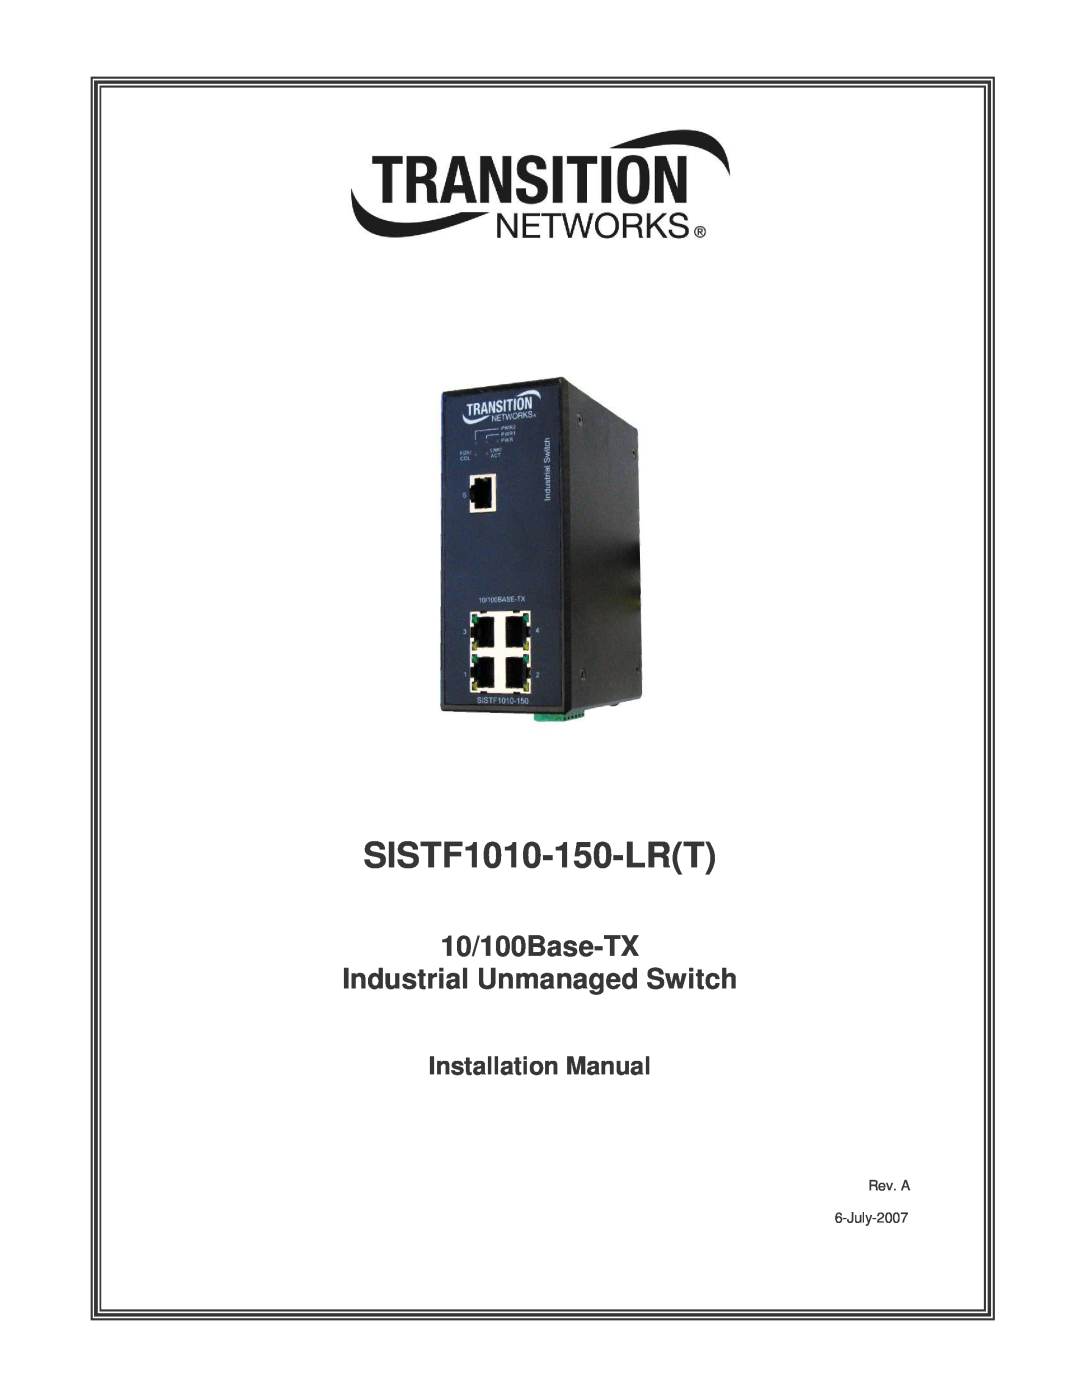 Transition Networks SISTF1010-150-LR(T) installation manual 10/100Base-TX Industrial Unmanaged Switch, Installation Manual 